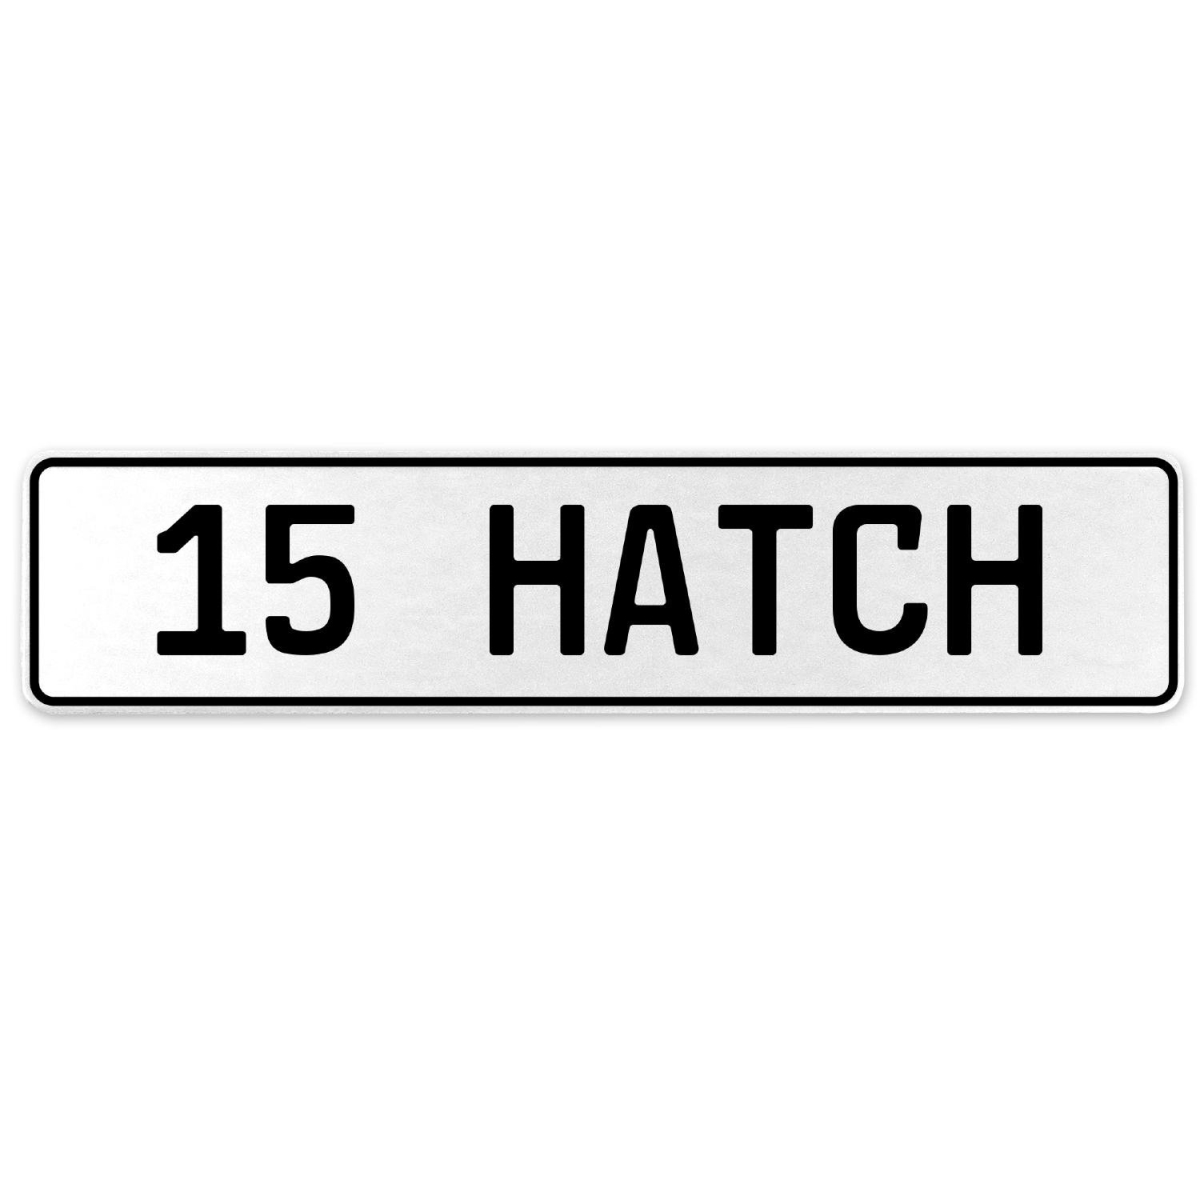 Vintage Parts USA 558374 15 Hatch - White Aluminum Street Sign Mancave Euro Plate Name Door Sign Wall